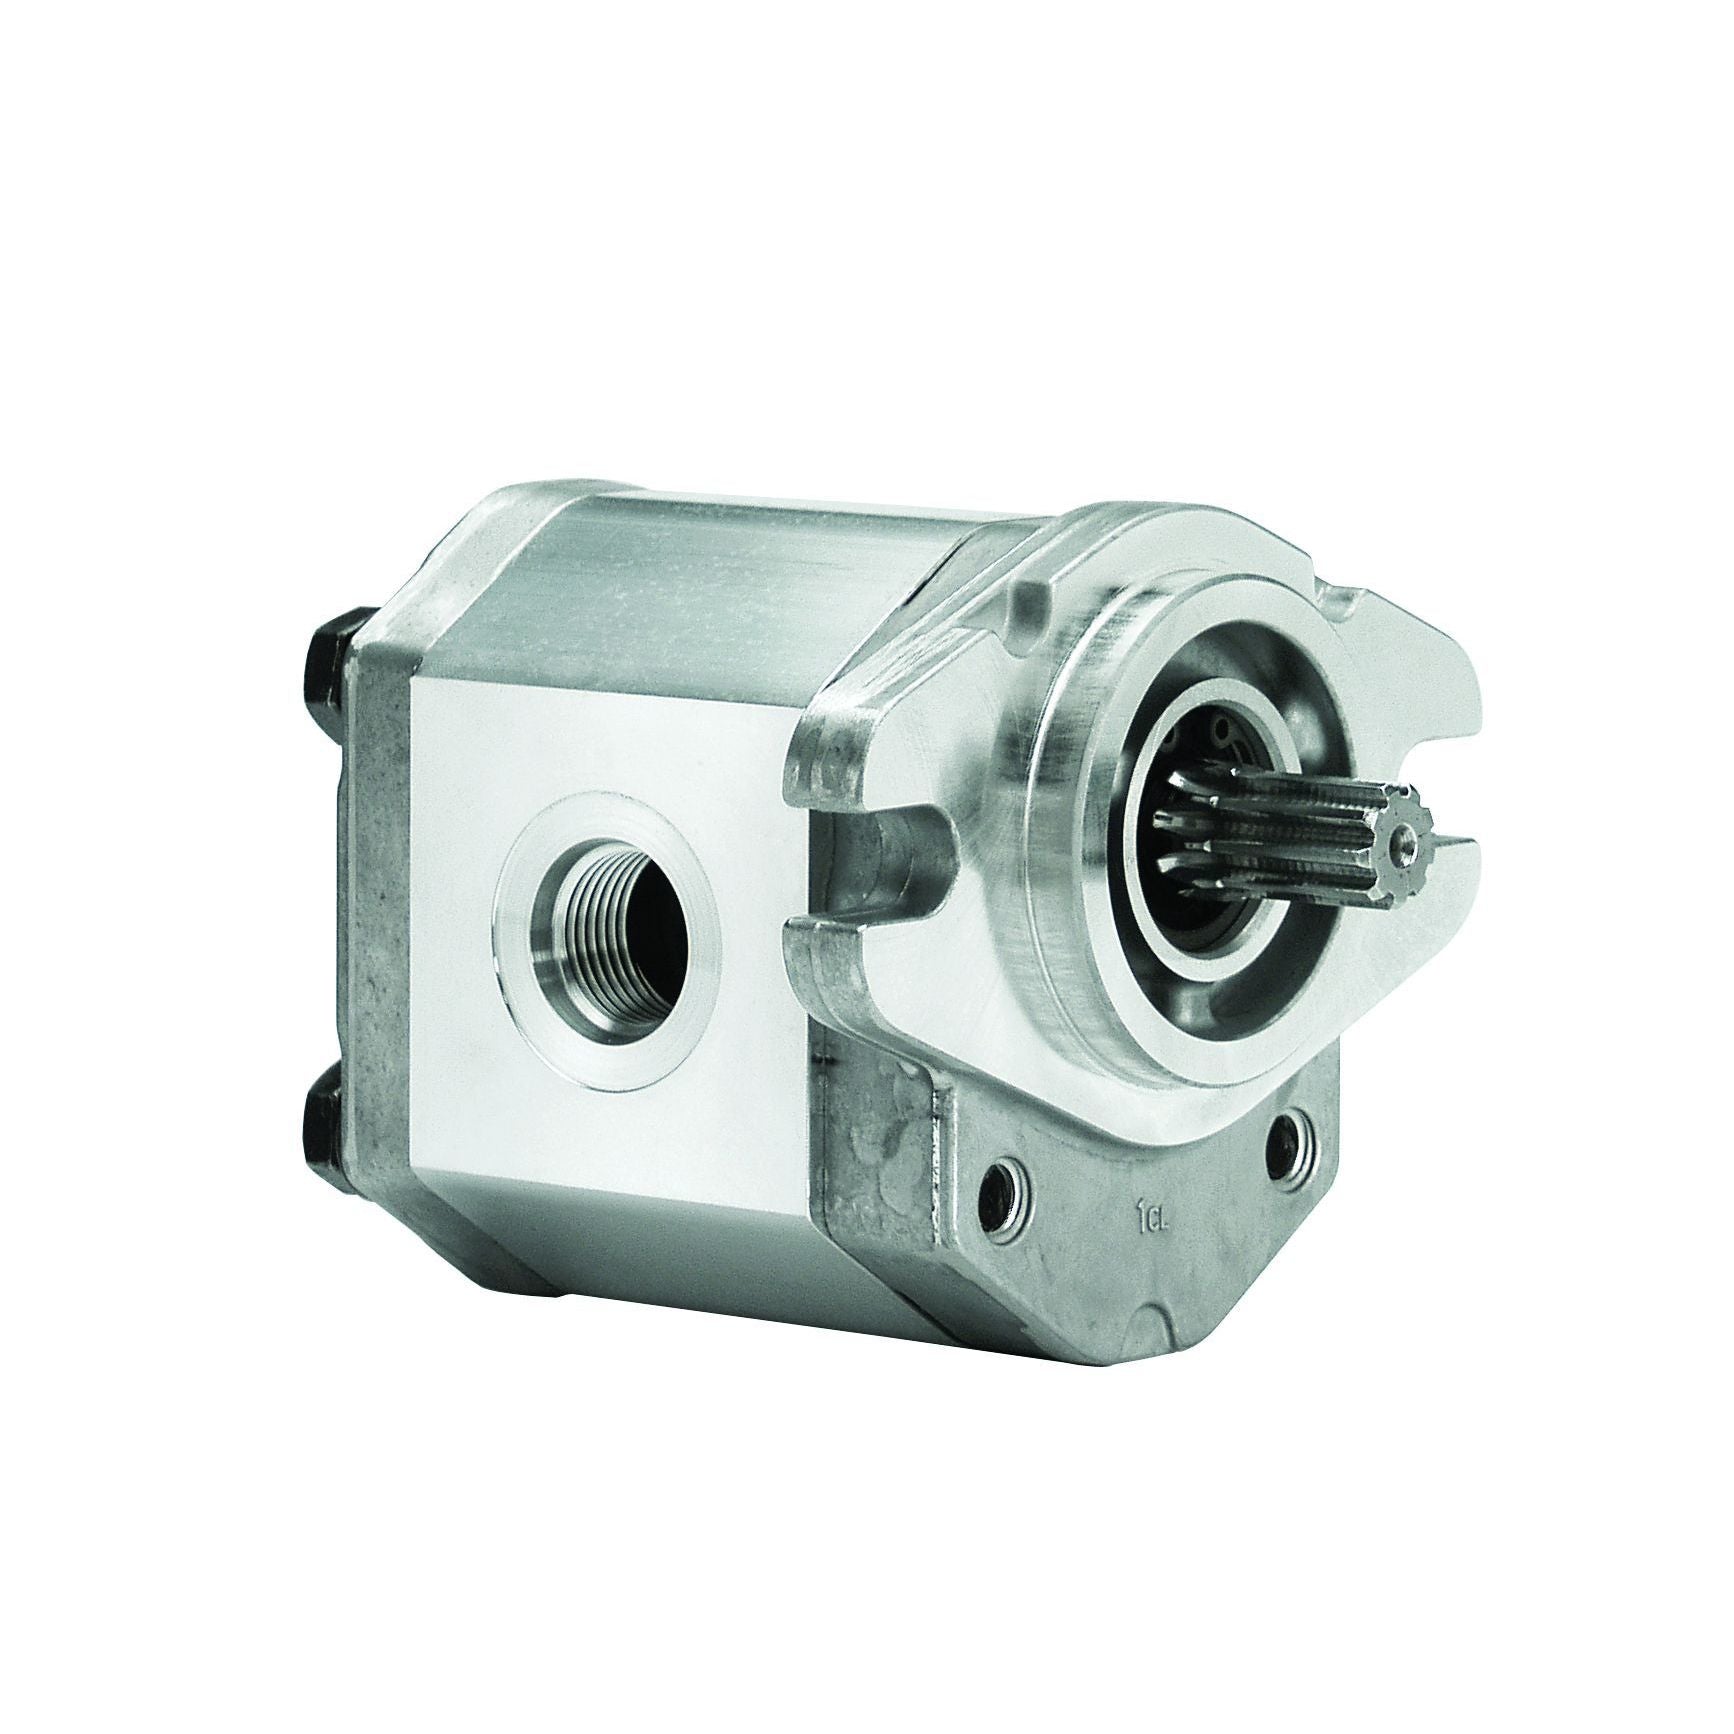 ALP3A-S-135-S1-FA : Marzocchi Gear Pump, CCW, 87cc (5.307in3), 41.35 GPM, 2030psi, 2000 RPM, #24 SAE (1.5") In, #12 SAE (3/4") Out, Splined Shaft 13T 16/32DP, SAE B 2-Bolt Mount